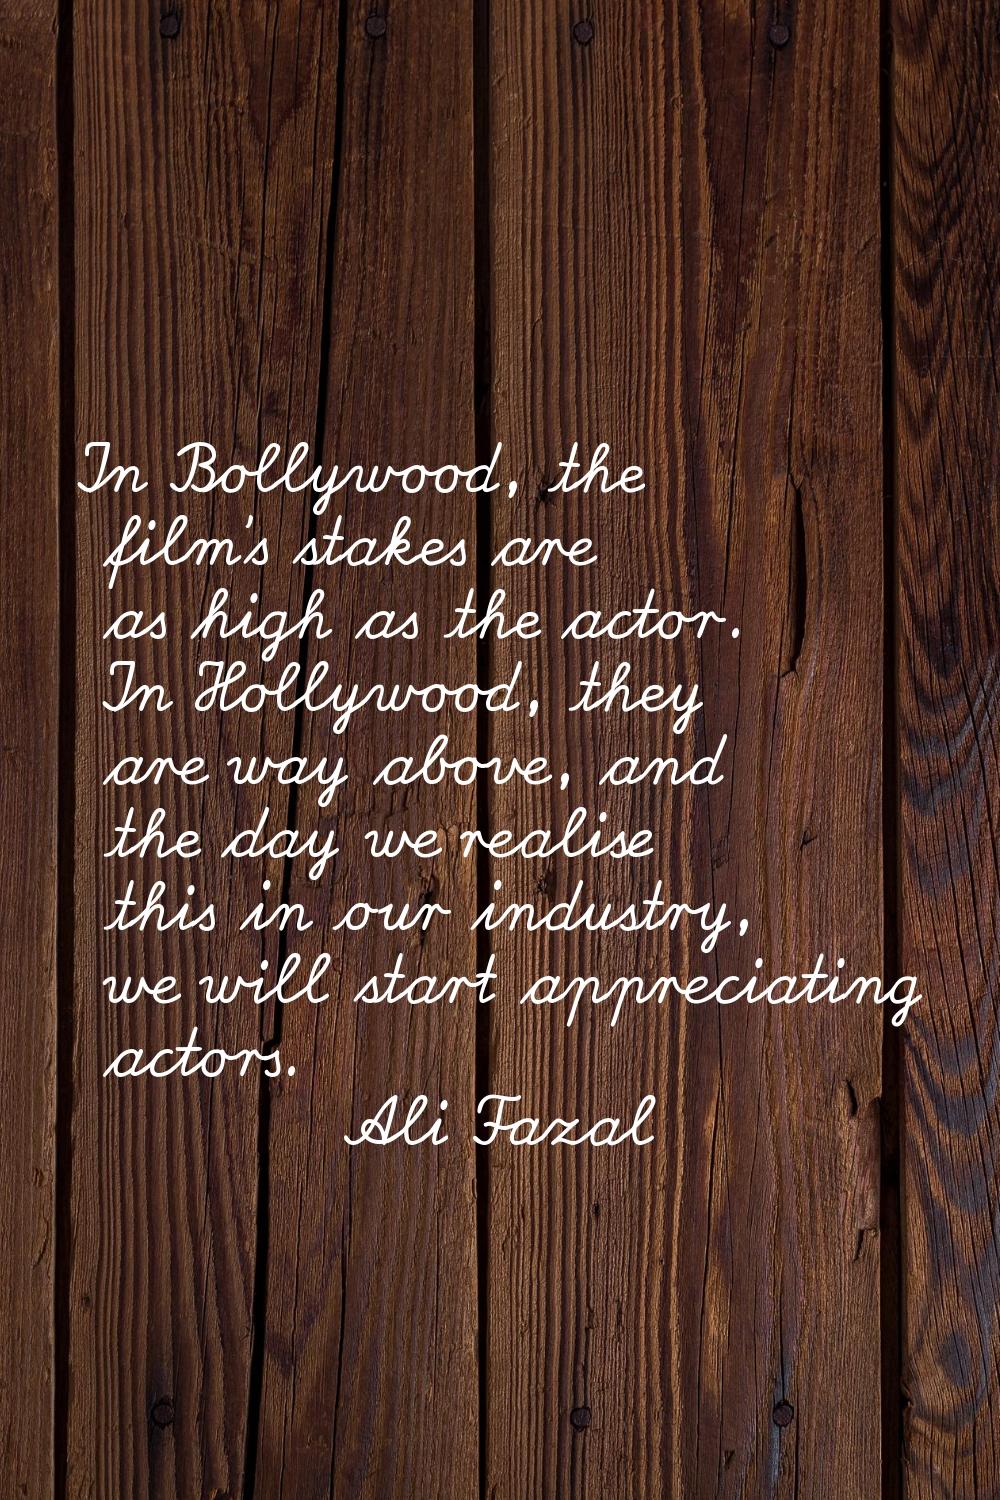 In Bollywood, the film's stakes are as high as the actor. In Hollywood, they are way above, and the